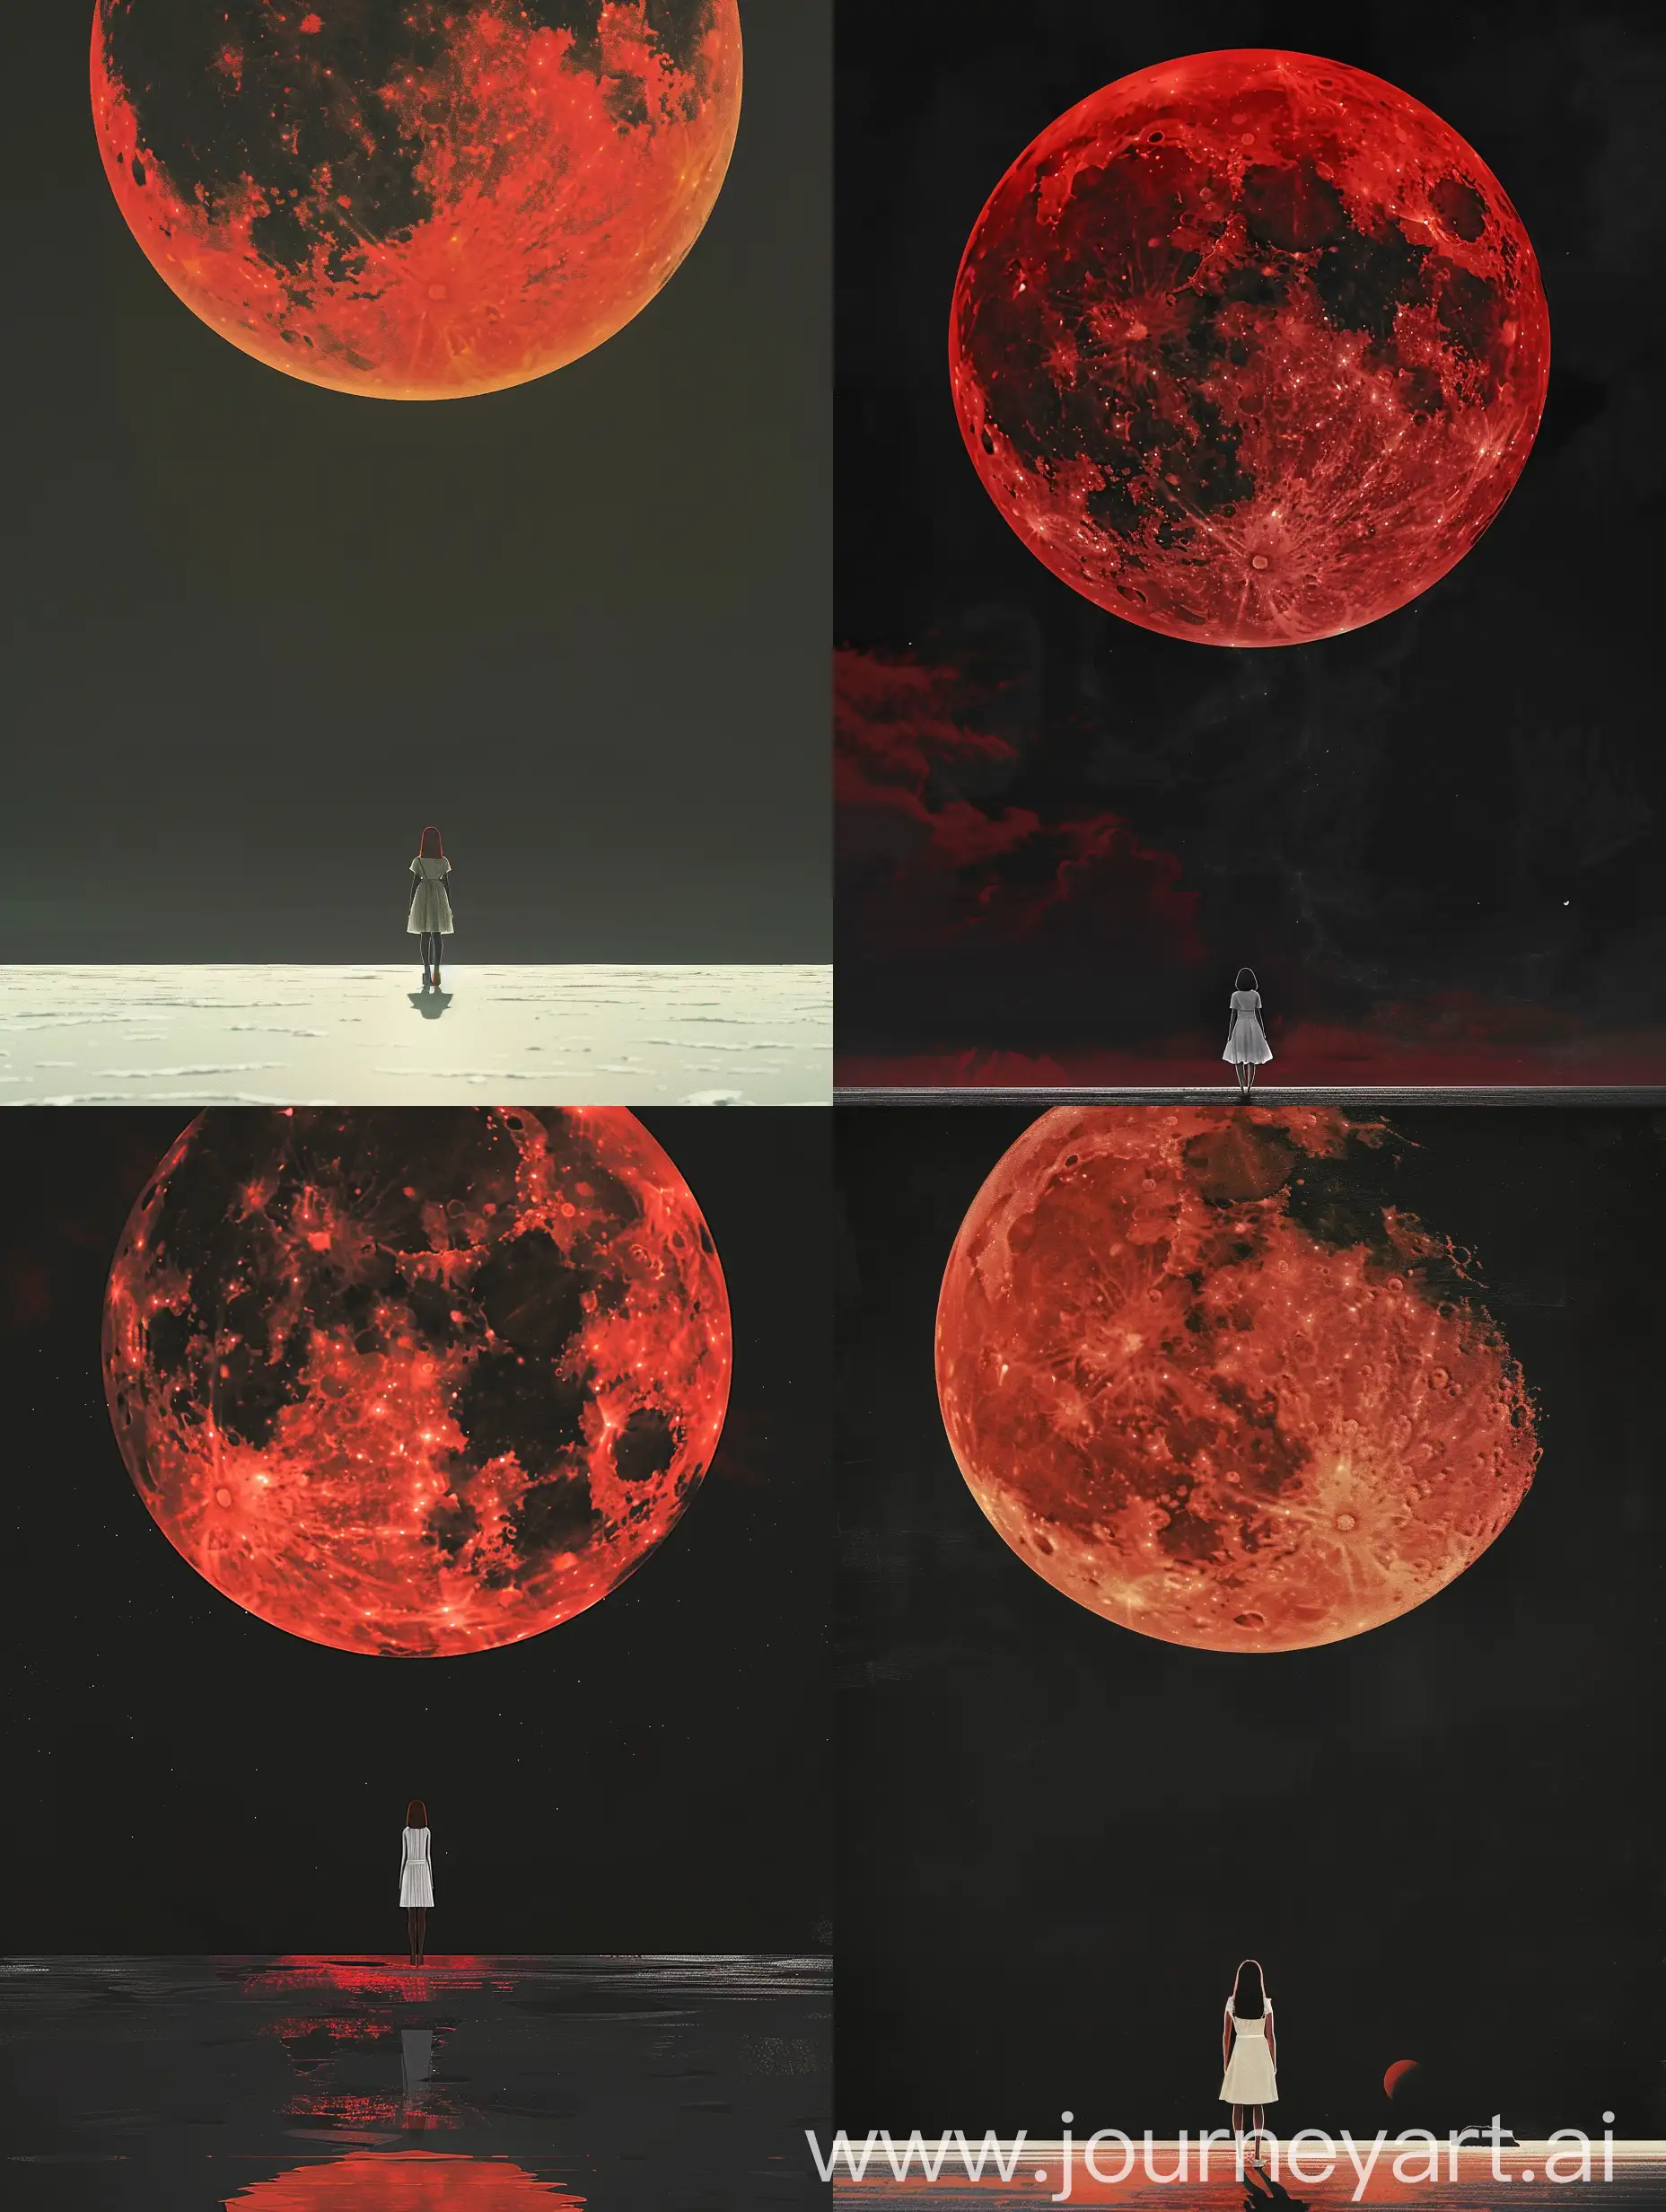 Lonely-Girl-Standing-Under-Giant-Red-Moon-Lim-Heng-Swee-Style-Art